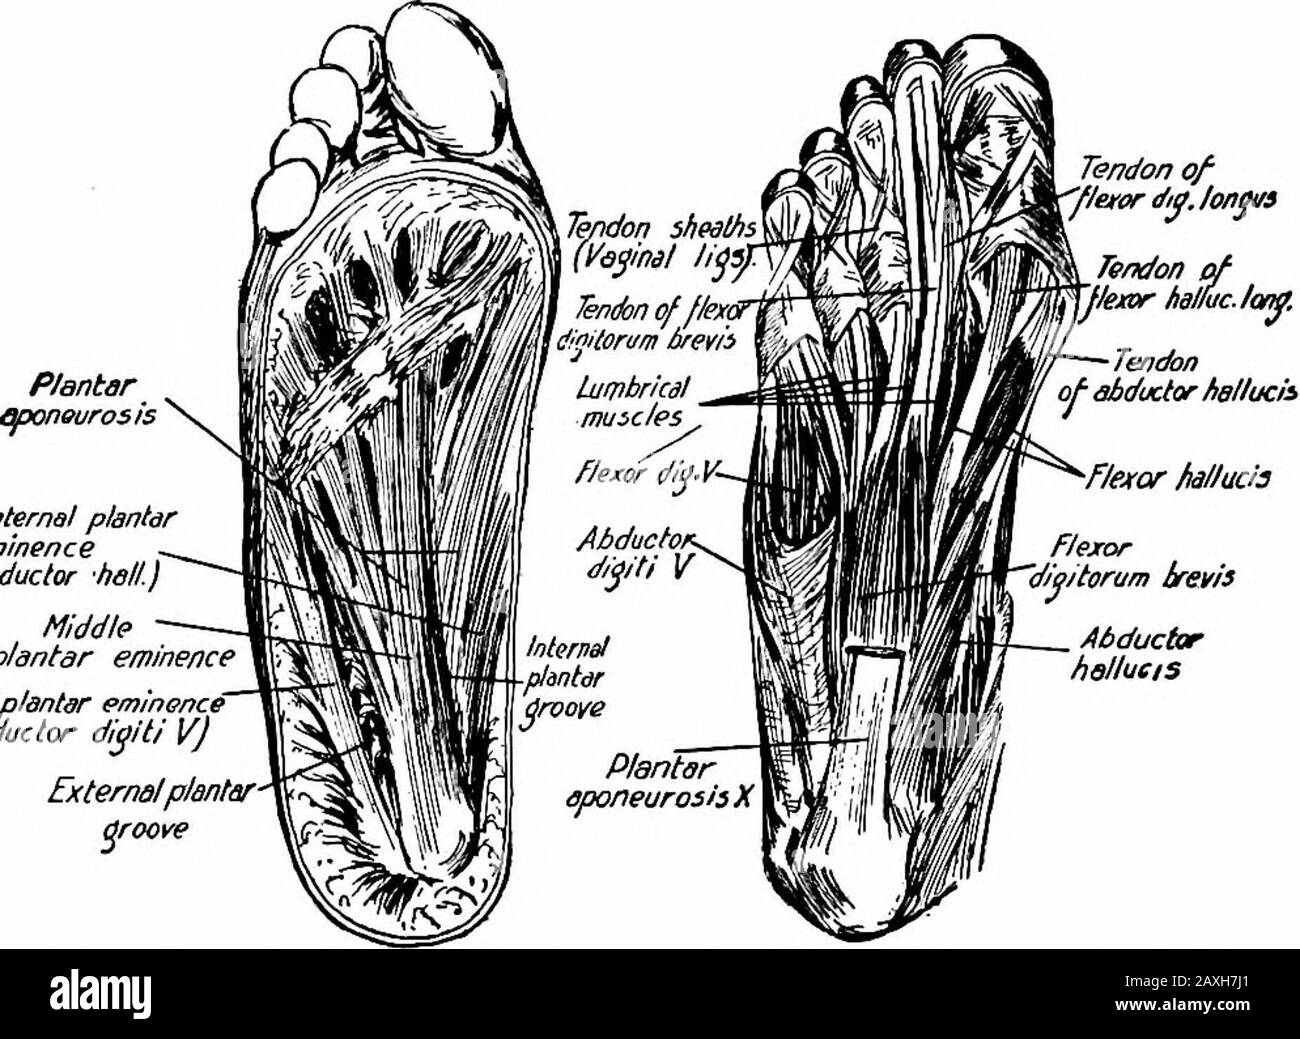 A manual of anatomy . into the lateral surface of the baseof the first phalanx of the little toe. Actions.—Flexes and abducts the little toe. 2o8 MYOLOGY Nerve Supply.—^Lateral plantar nerve (S. i, 2). Second Layer.—The mm. lumbricales are Jour muscles associatedwith the flexor digitorum longus tendons. The first arises from themedial side of the tendon for the second toe and the others arise fromthe adjacent side of all four tendons. Each muscle is inserted intothe extensor tendon and the base of the first phalanx of the fourouter toes, as in the hand. Actions.—Flex the metatarsophalangeal jo Stock Photo